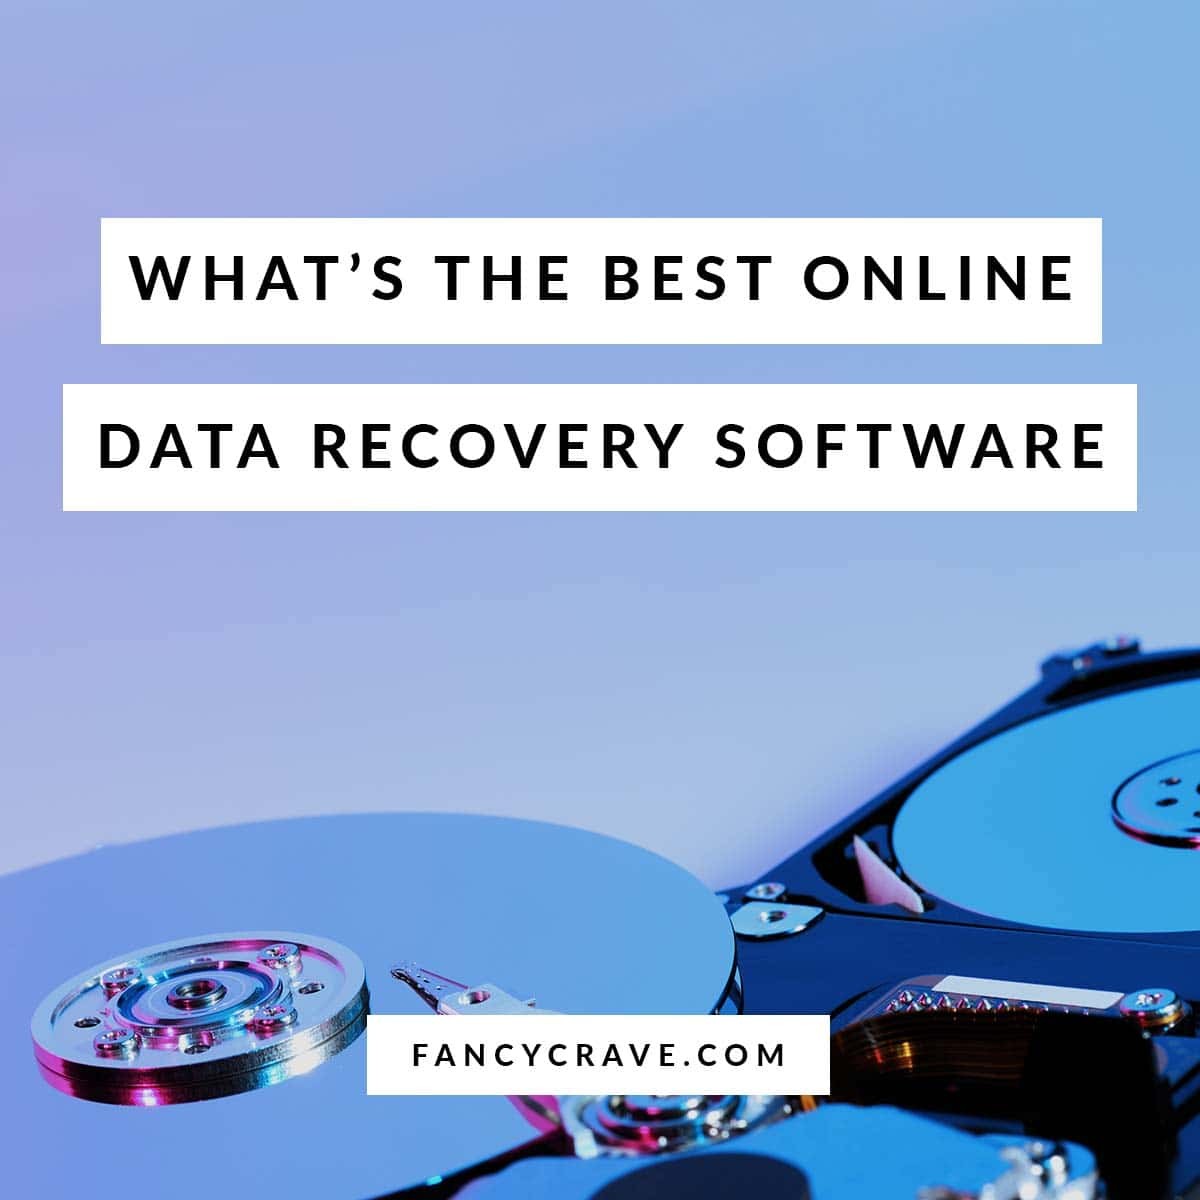 Online Data Recovery Software